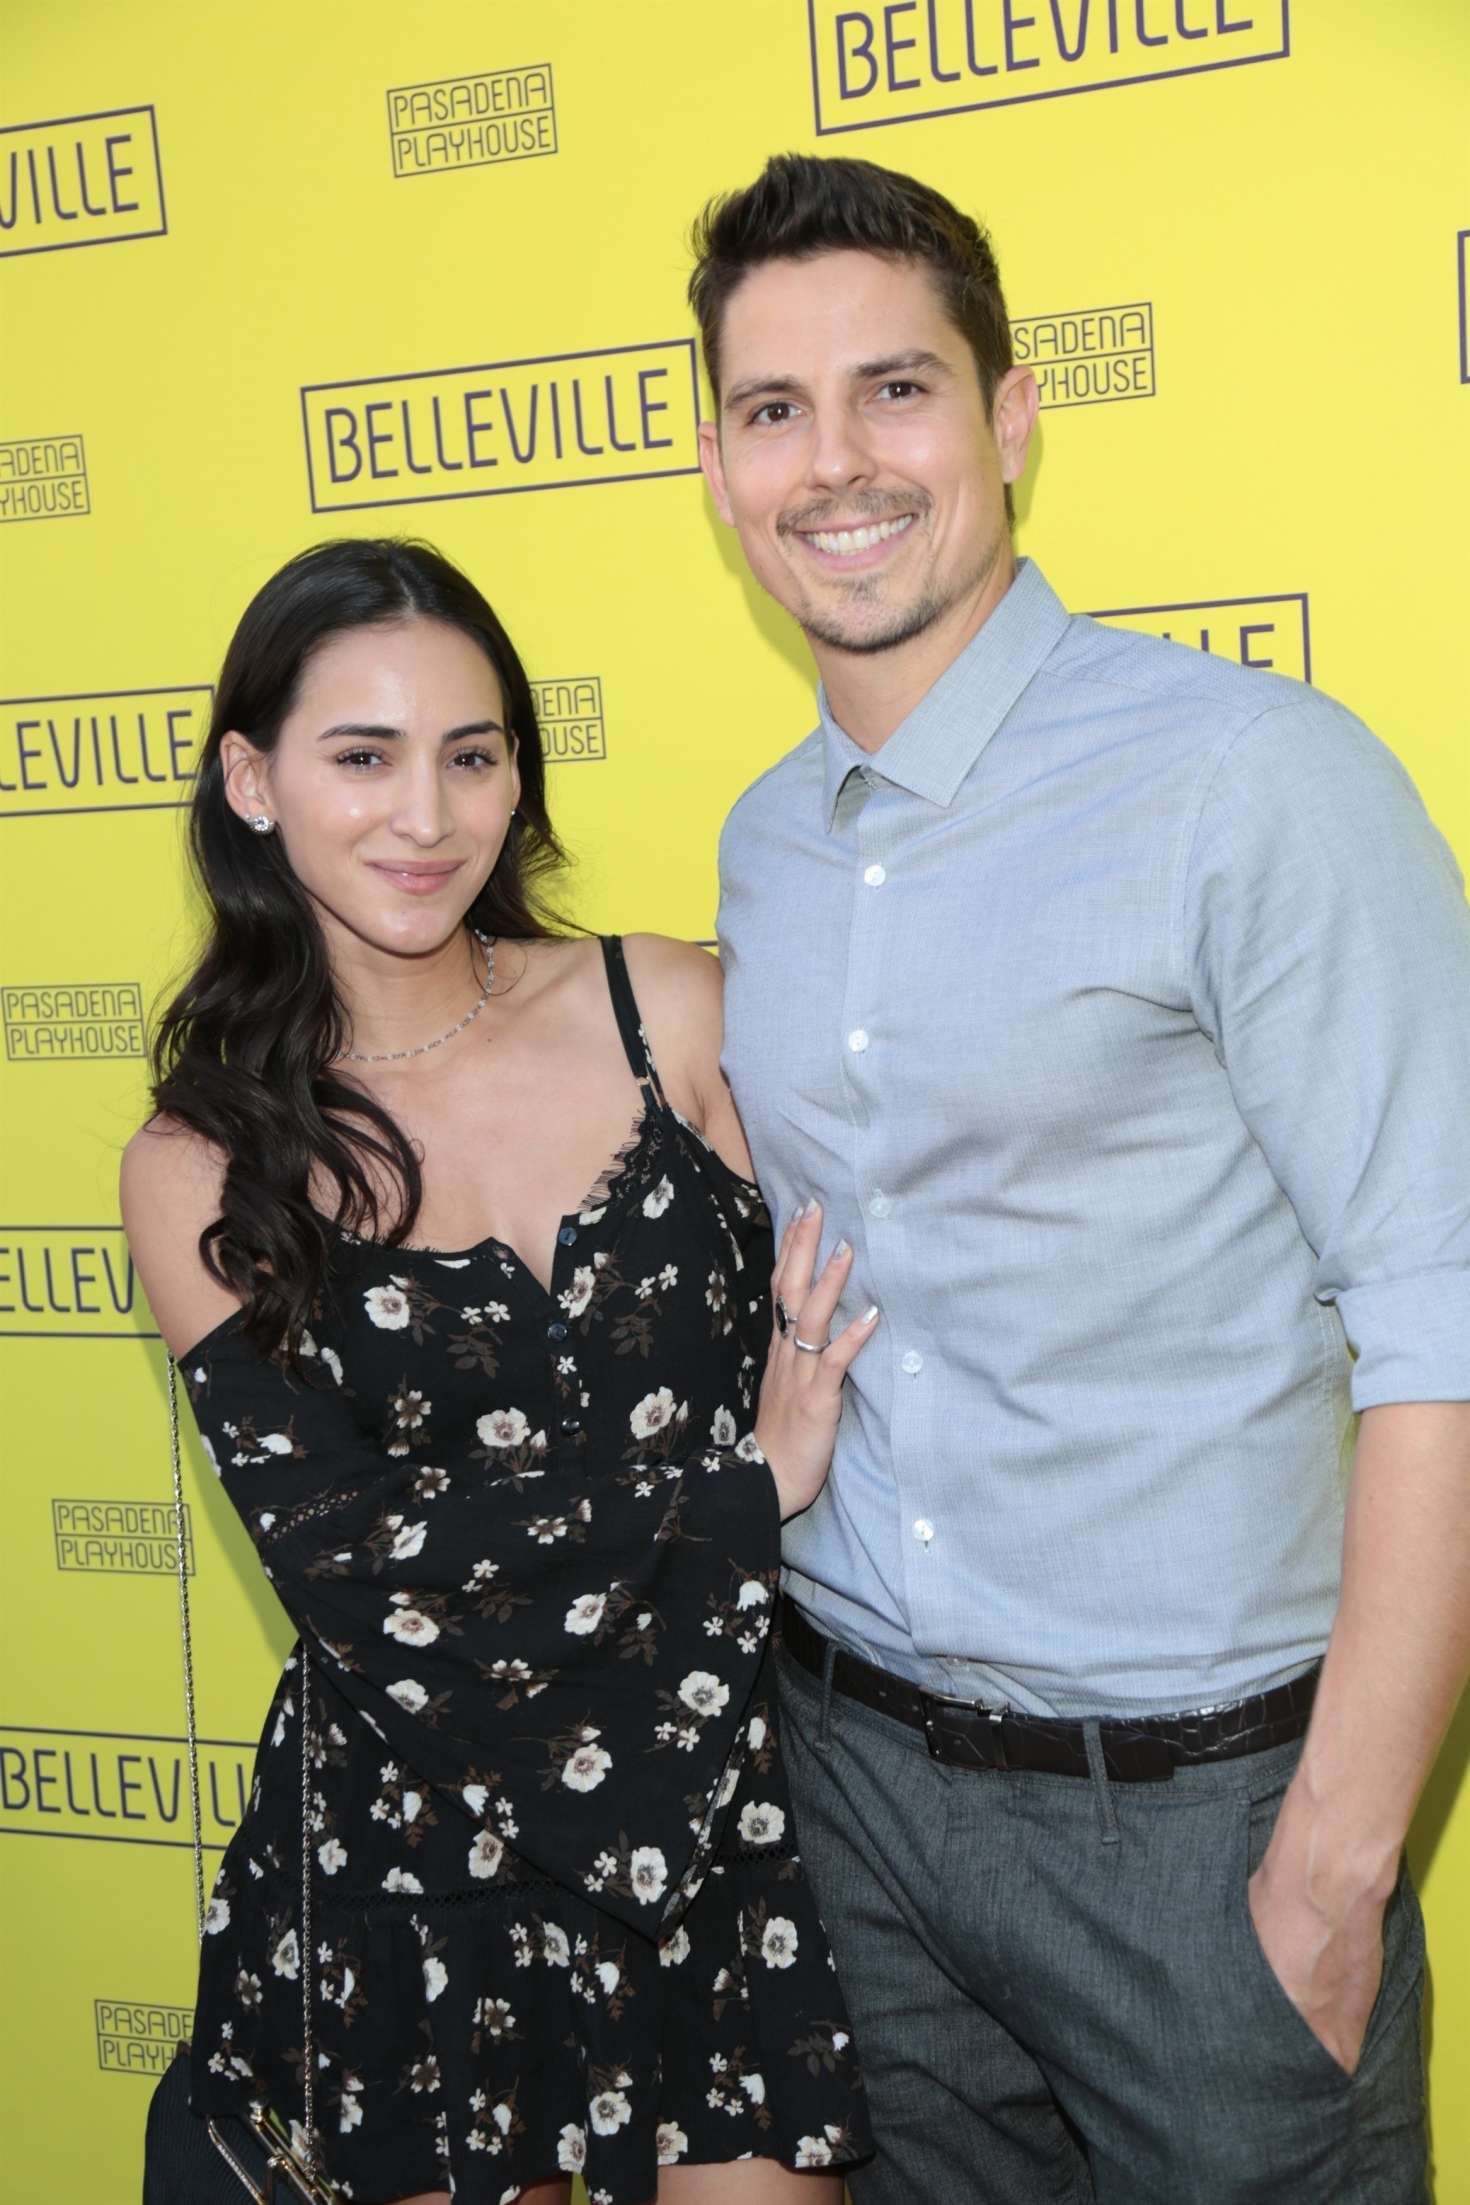 Cherie Daly â€“ Opening Night Of Belleville in Pasadena